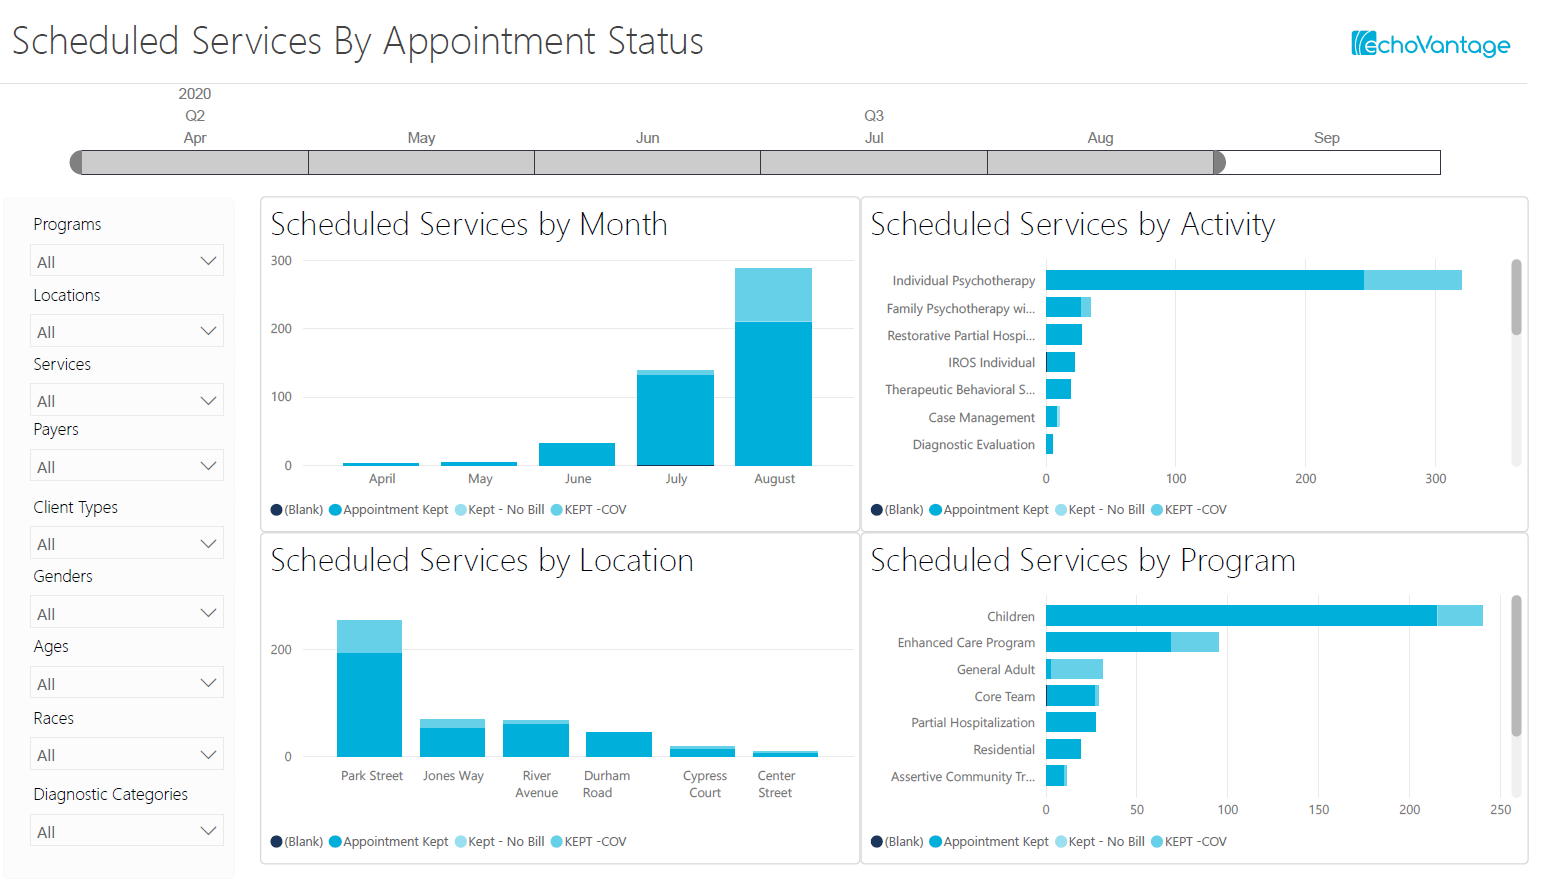 Scheduled Services by Appointment Status dashboard